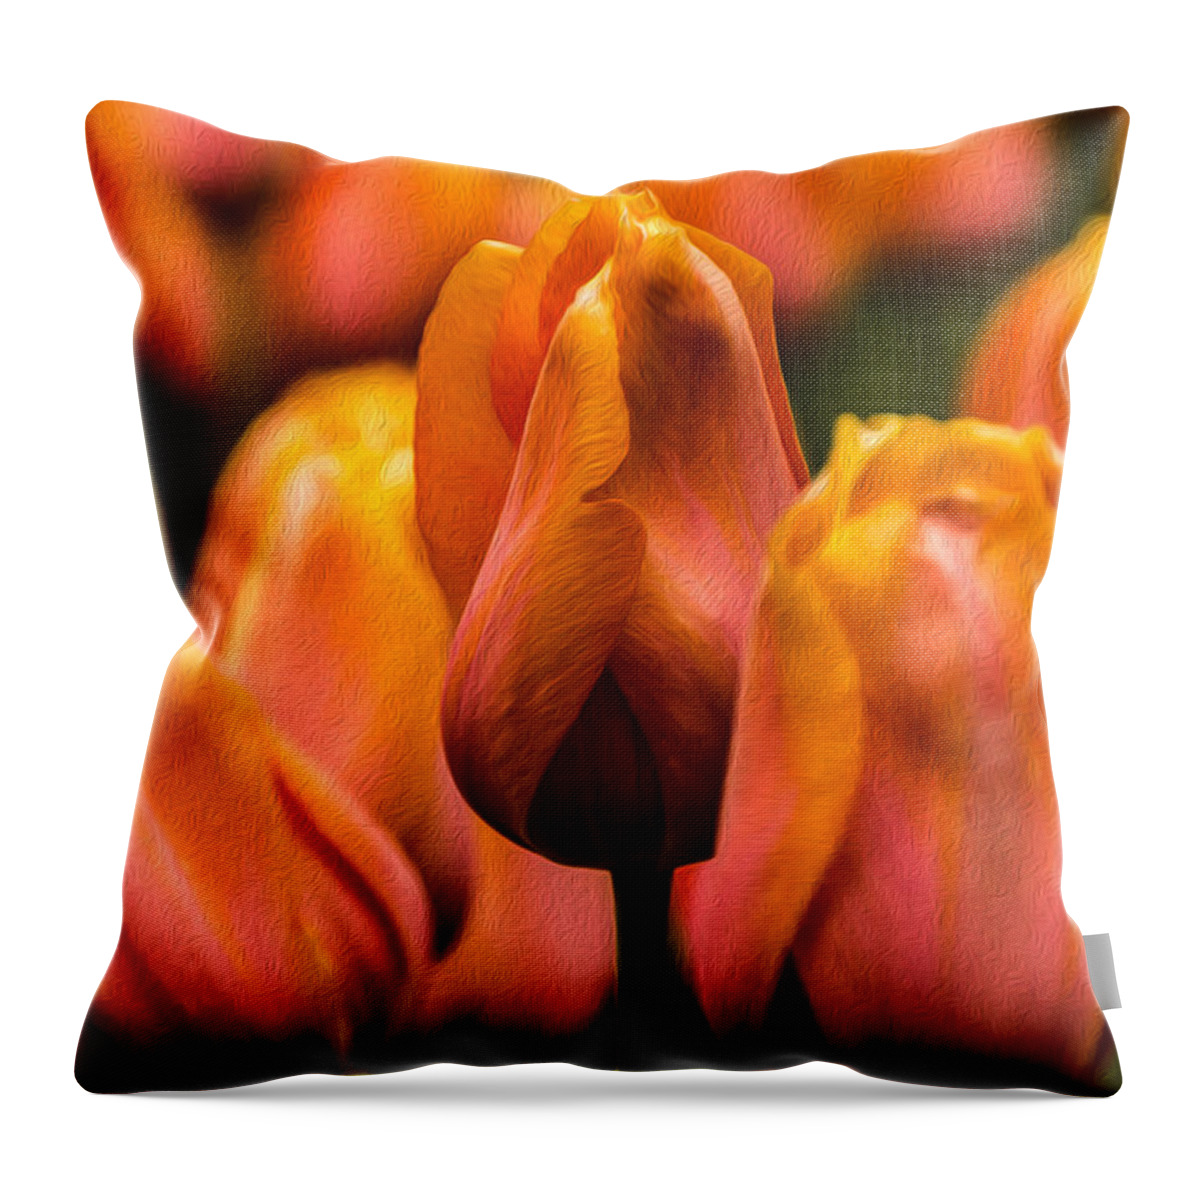 Jay Stockhaus Throw Pillow featuring the photograph Painted Tulips 2 by Jay Stockhaus